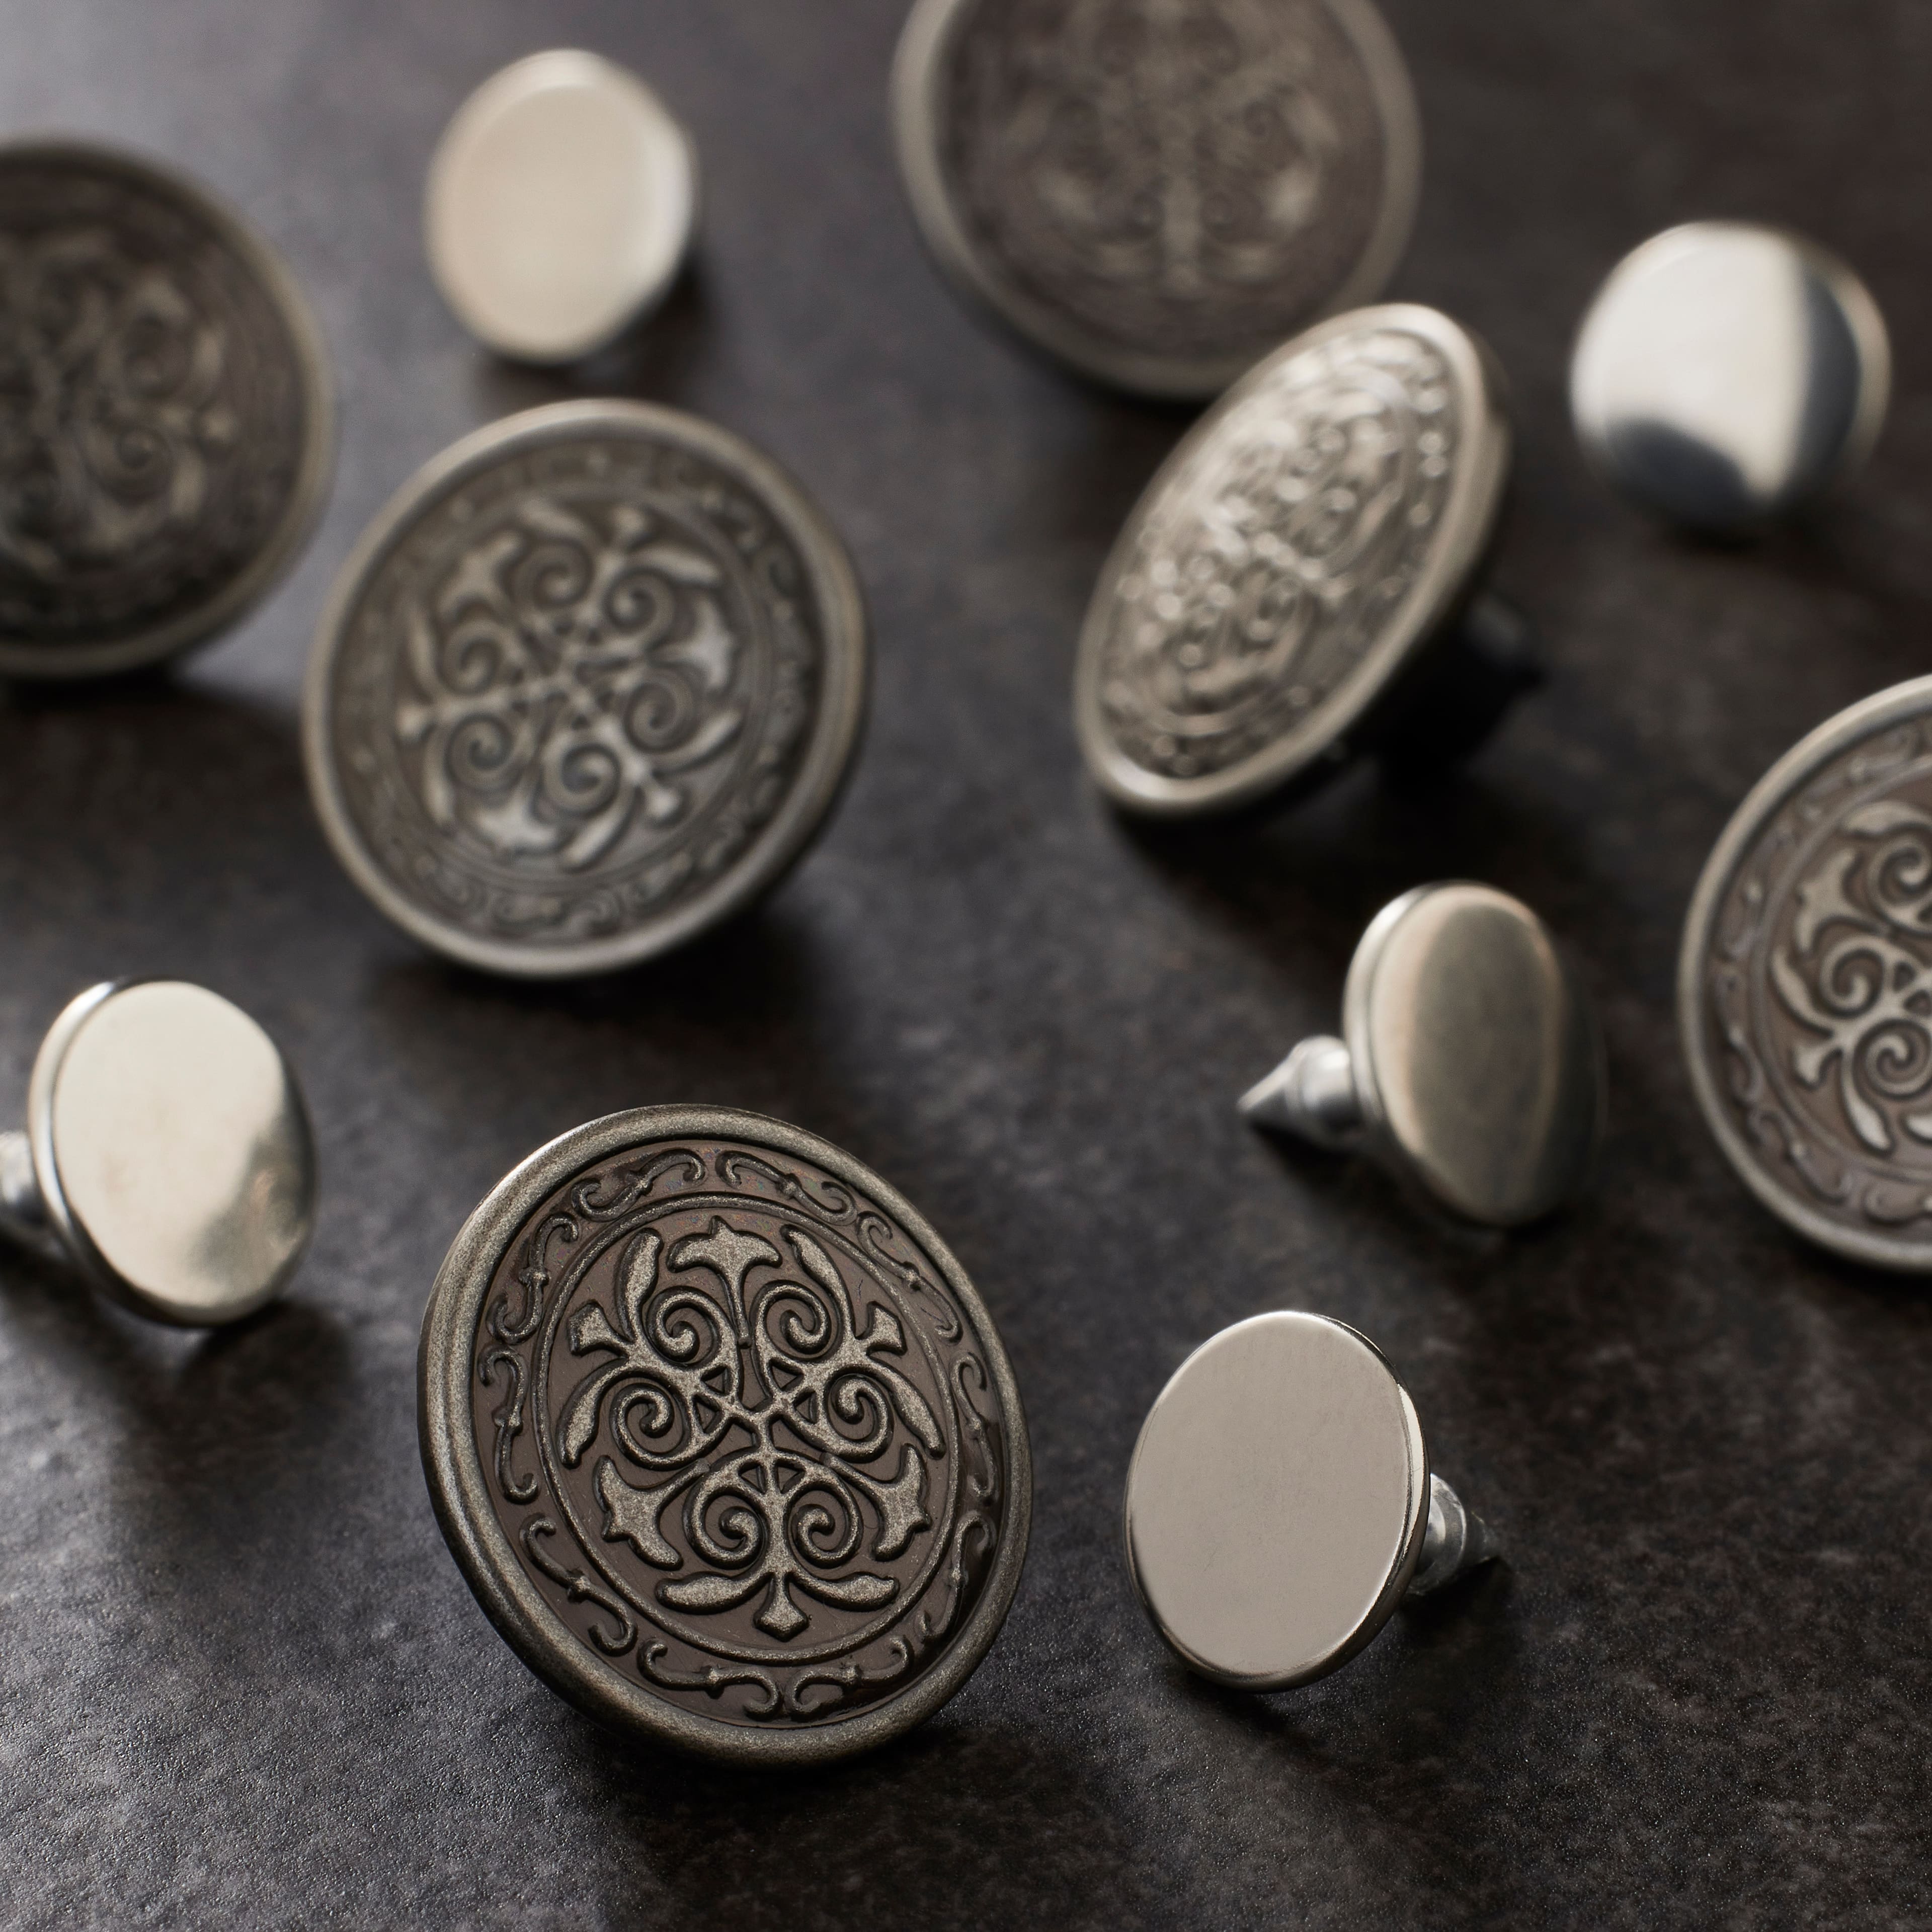 Silver Filigree Jean Buttons by Loops & Threads | Michaels